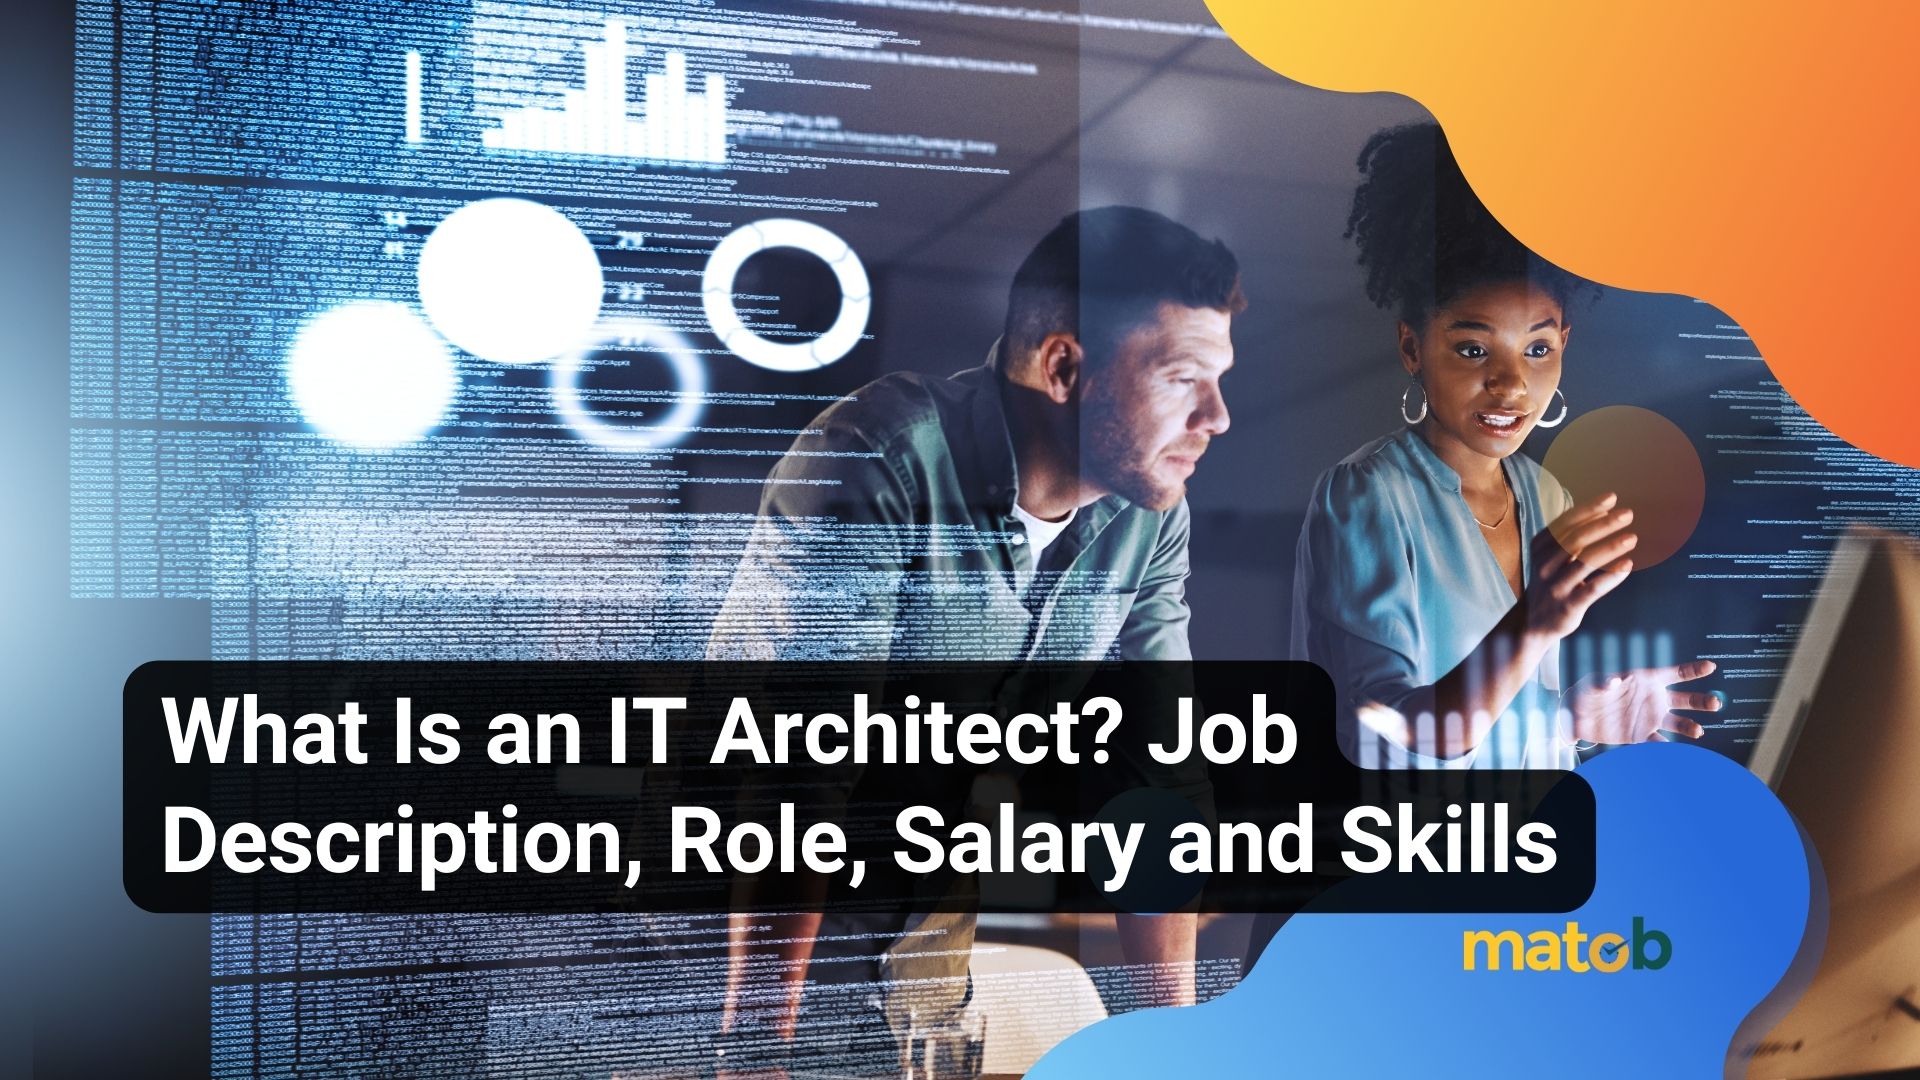 What Is an IT Architect? Job Description, Role, Salary and Skills